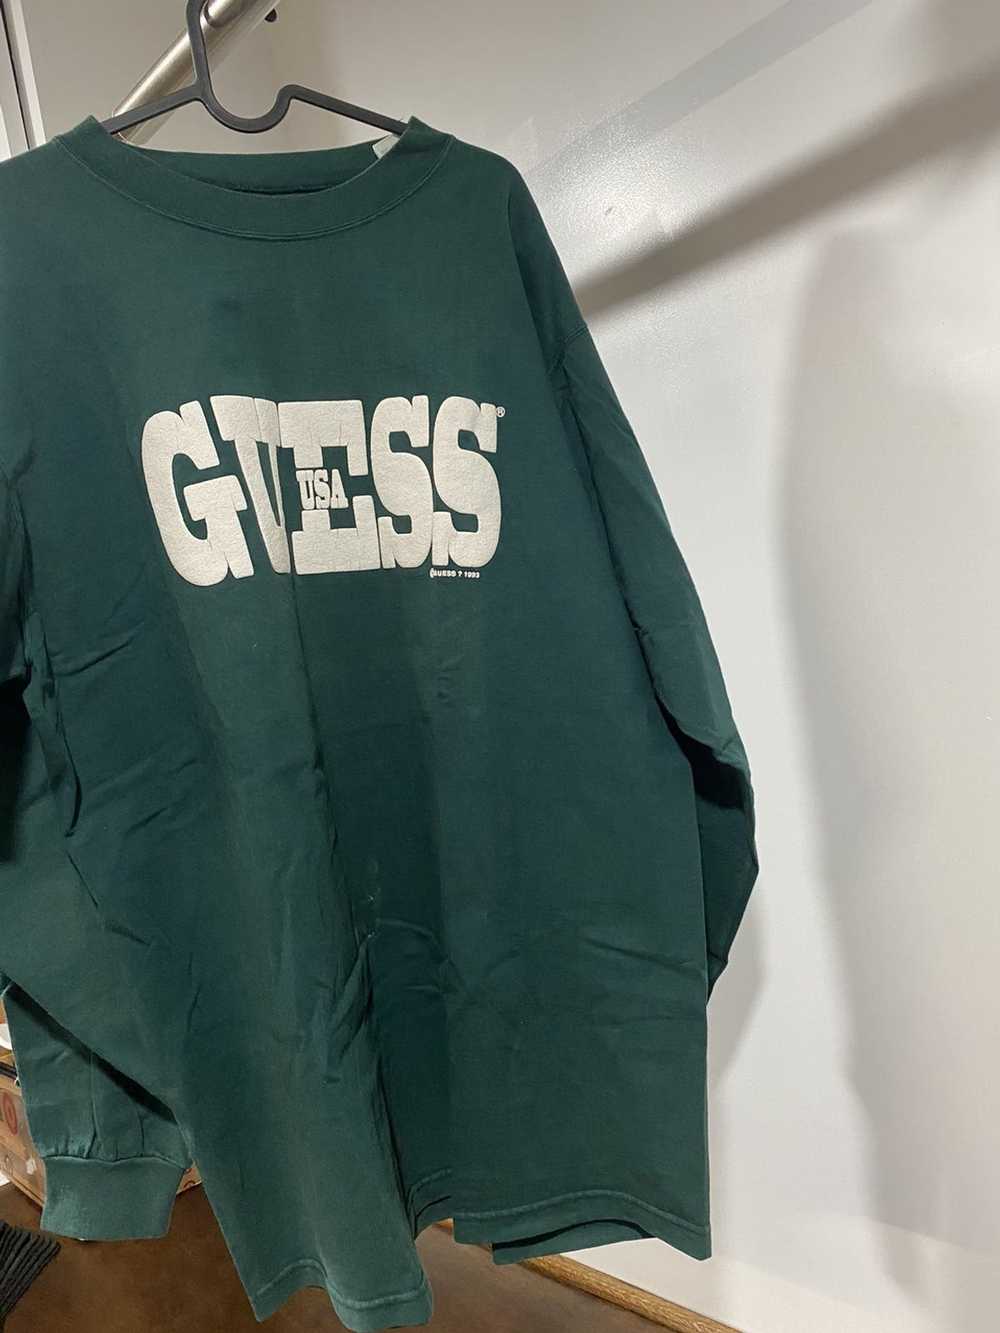 Guess Guess Vintage tee - image 1